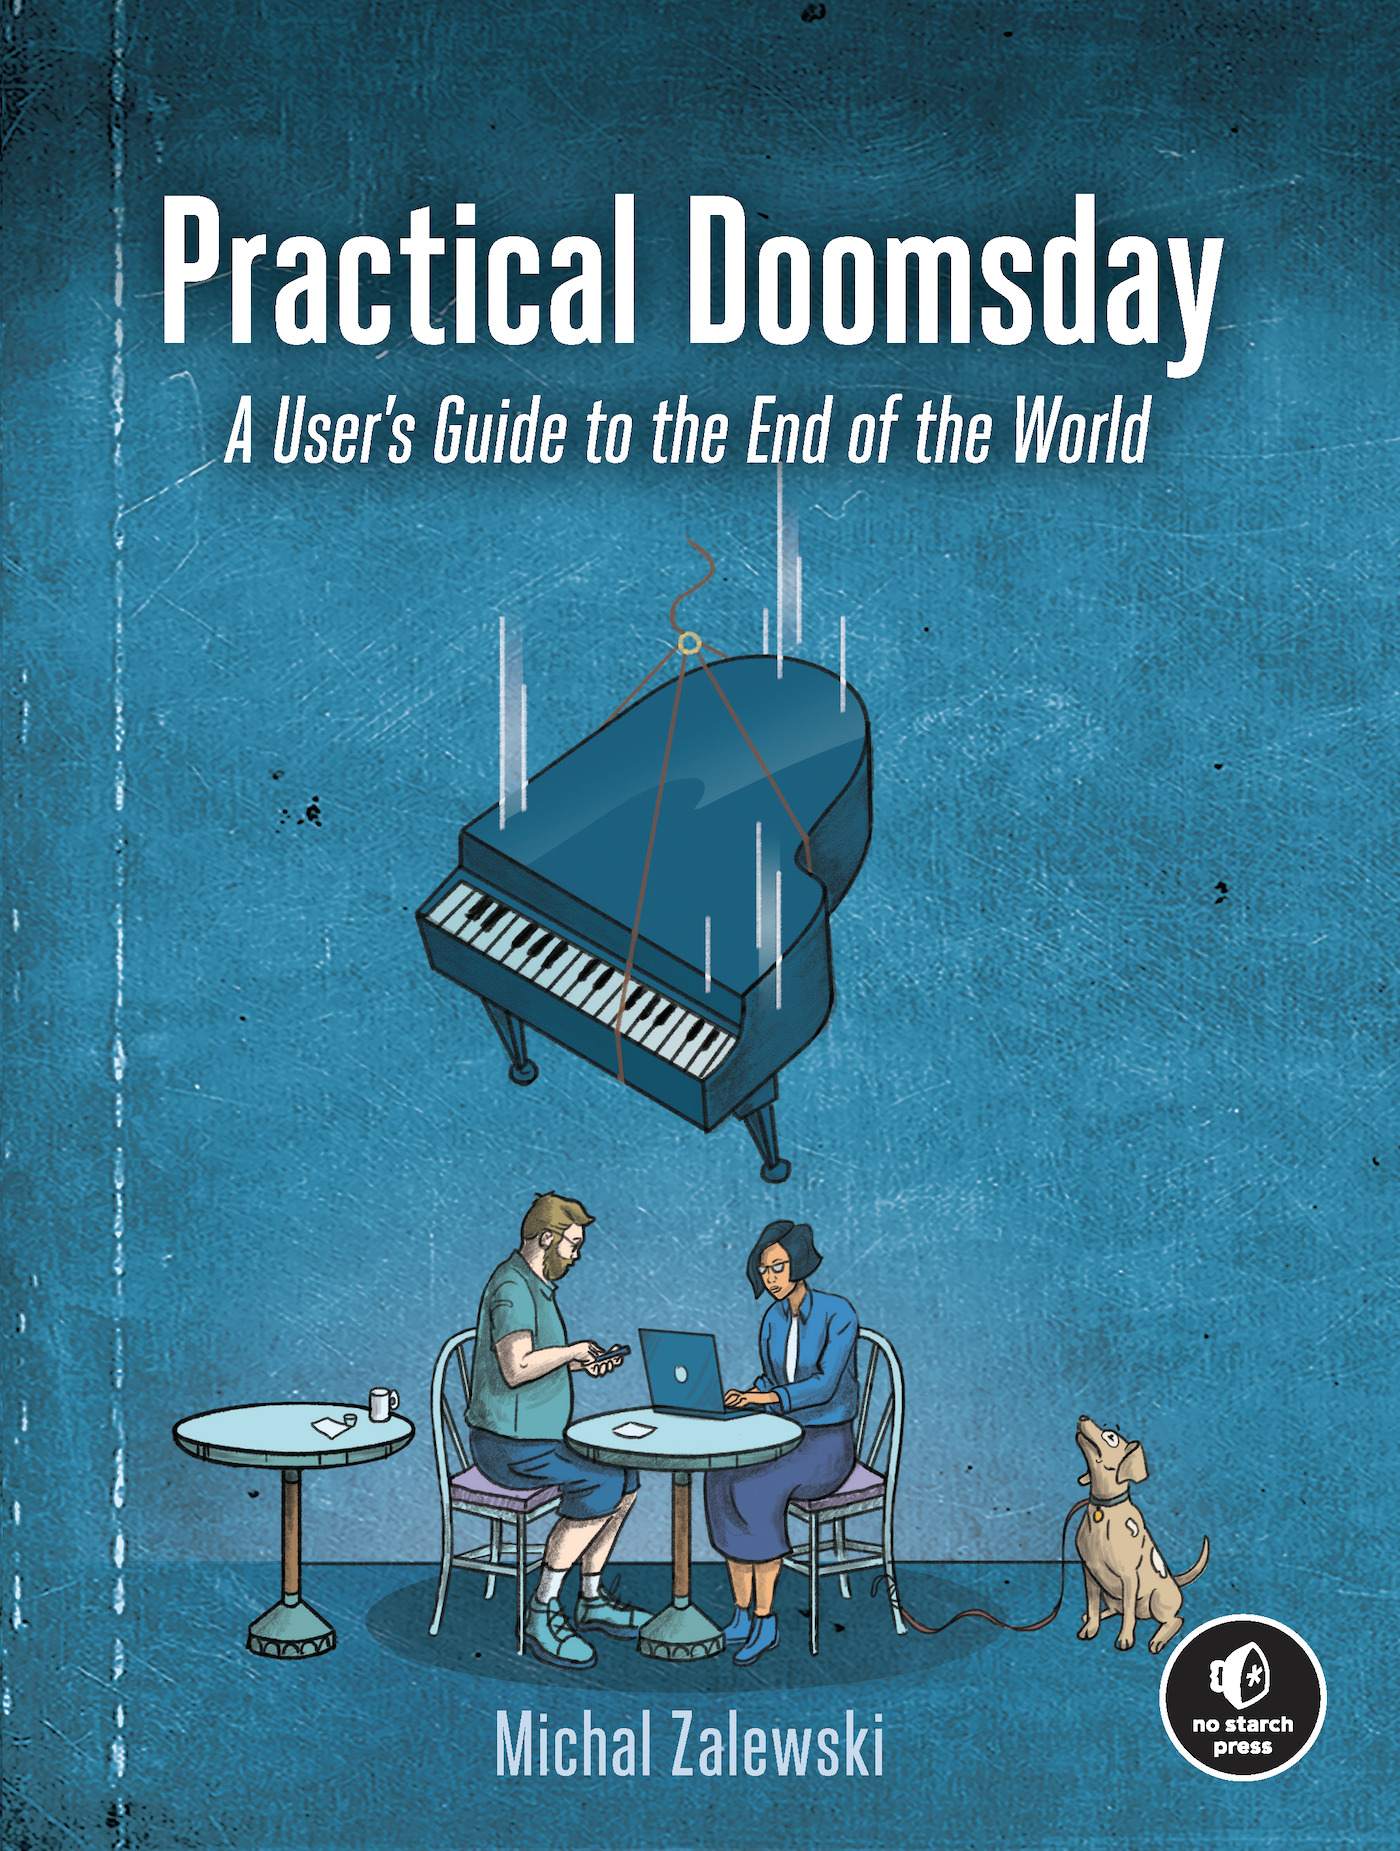 Practical Doomsday : A User's Guide to the End of the World | Zalewski, Michal